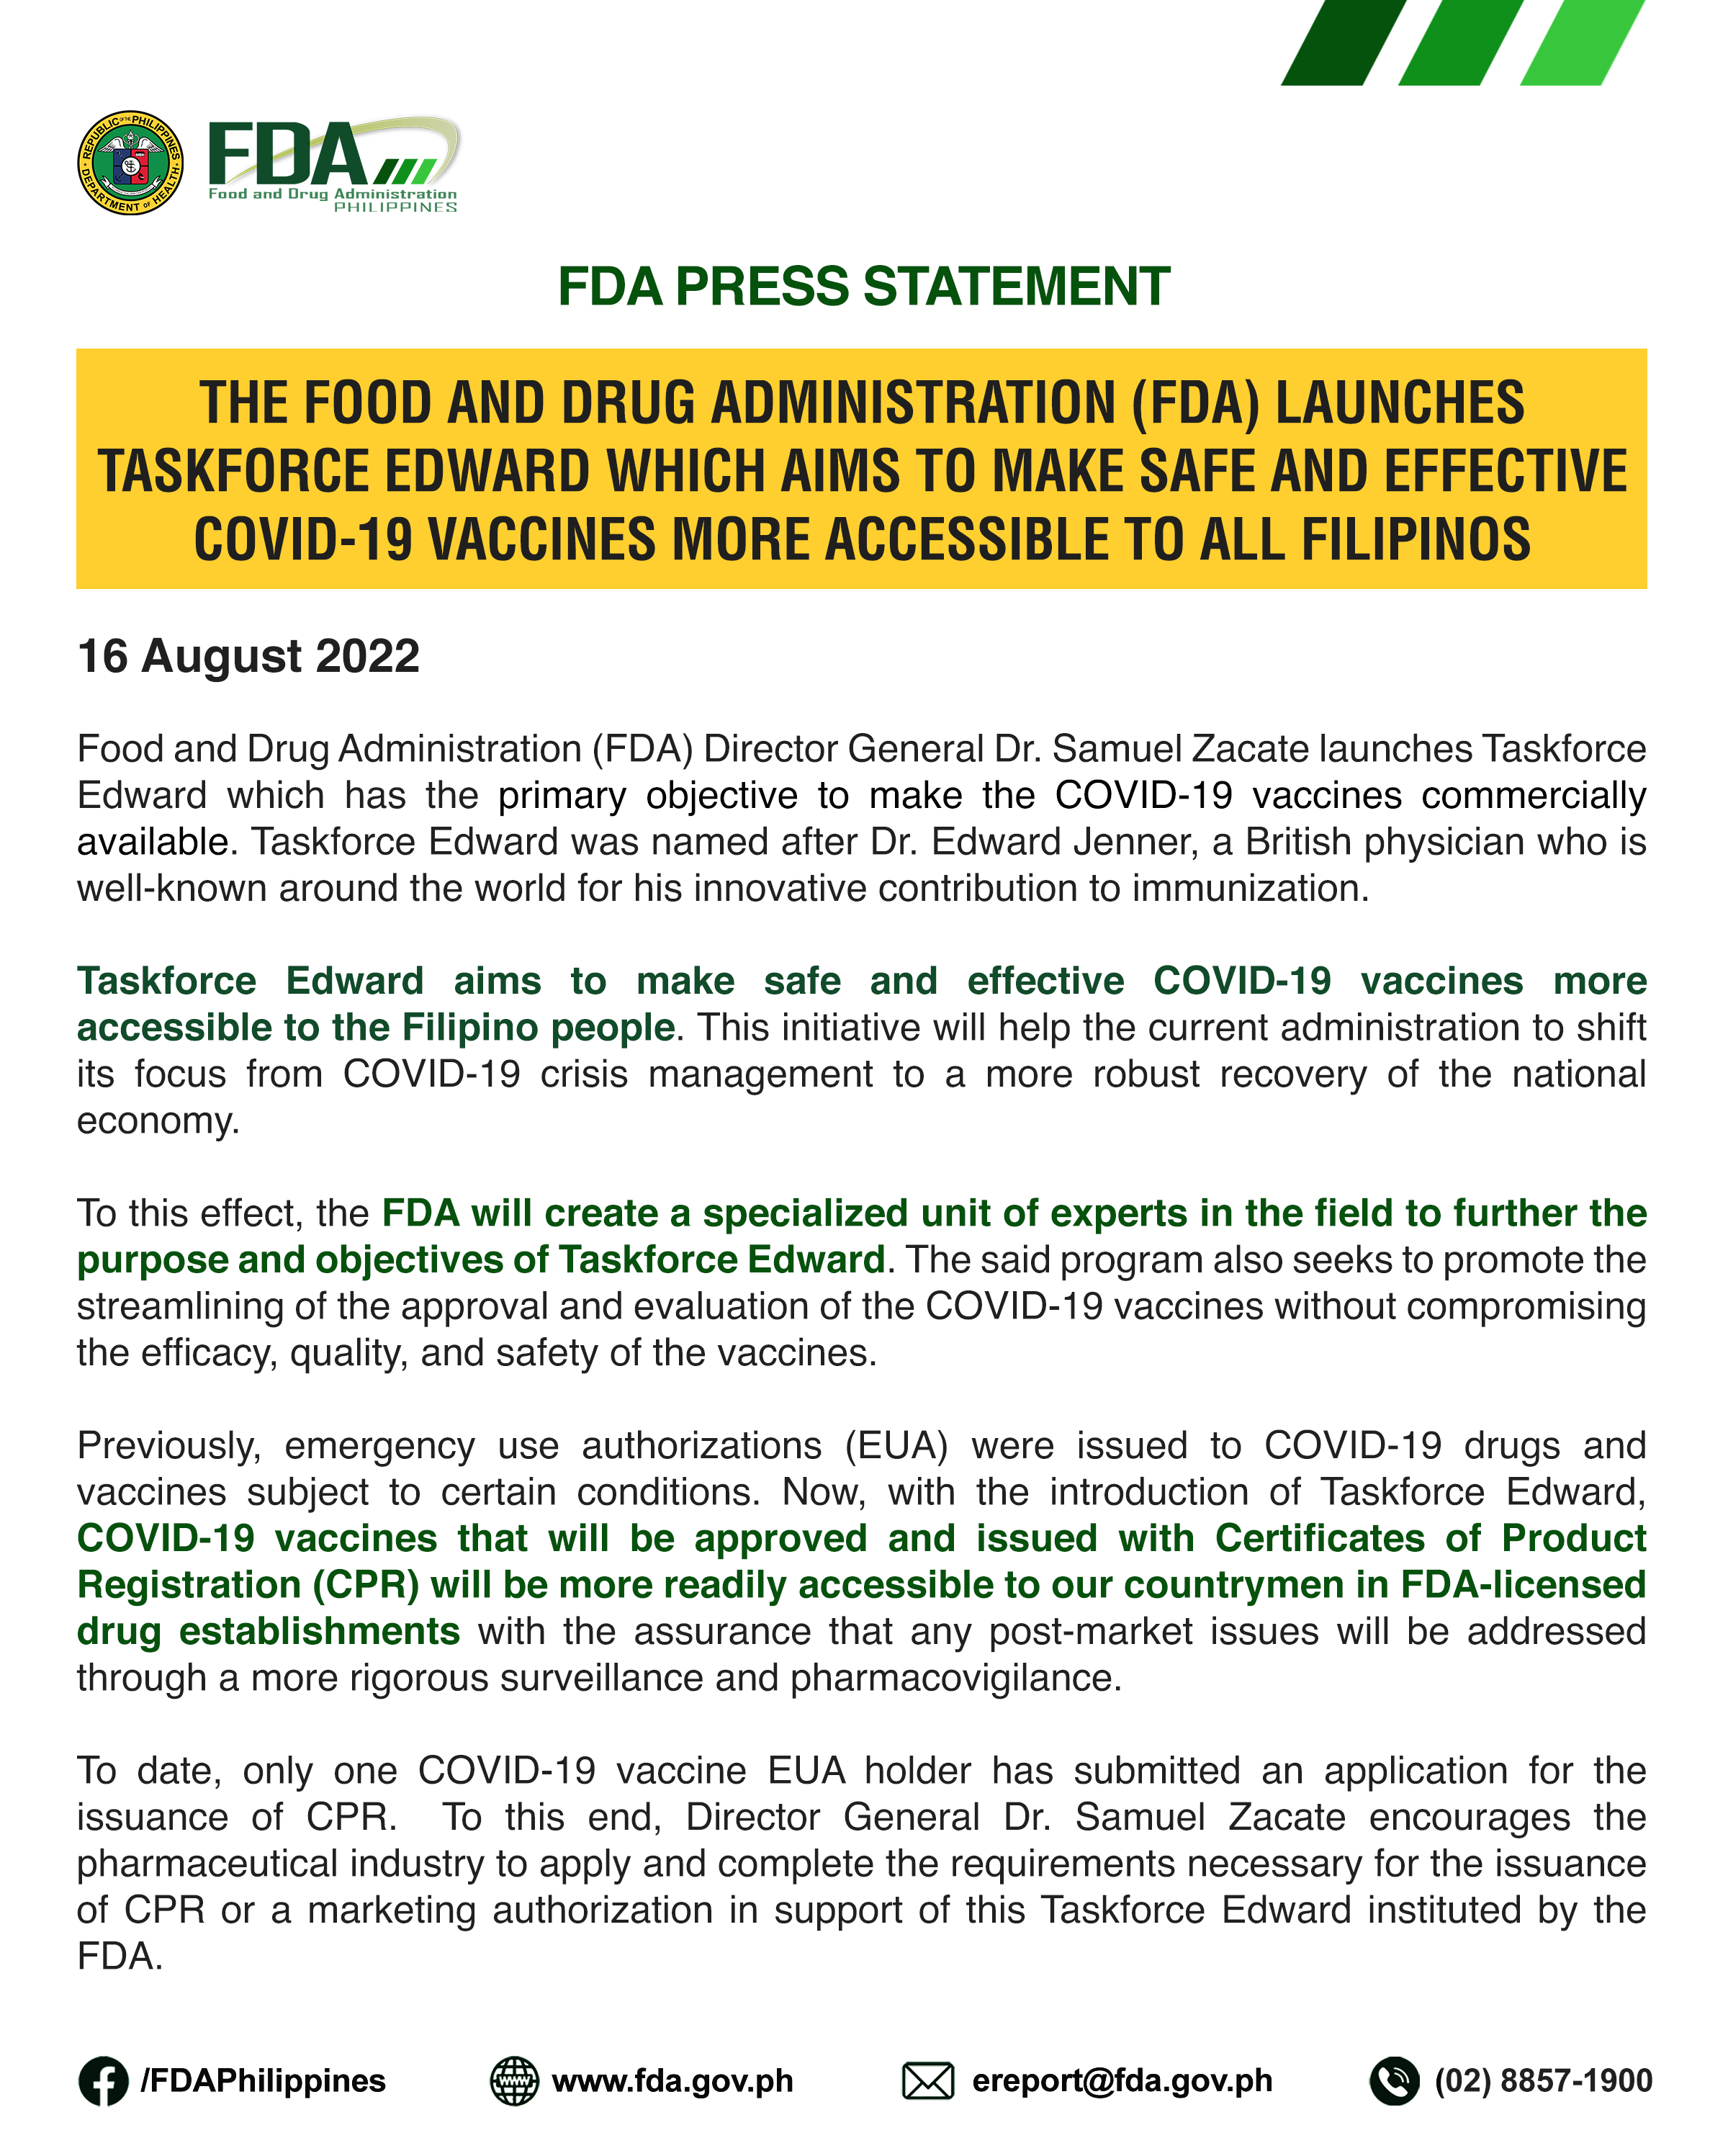 FDA Press Statement || The Food and Drug Administration (FDA) Launches Taskforce Edward Which Aims to Make Safe and Effective COVID-19 Vaccines More Accessible to All Filipinos